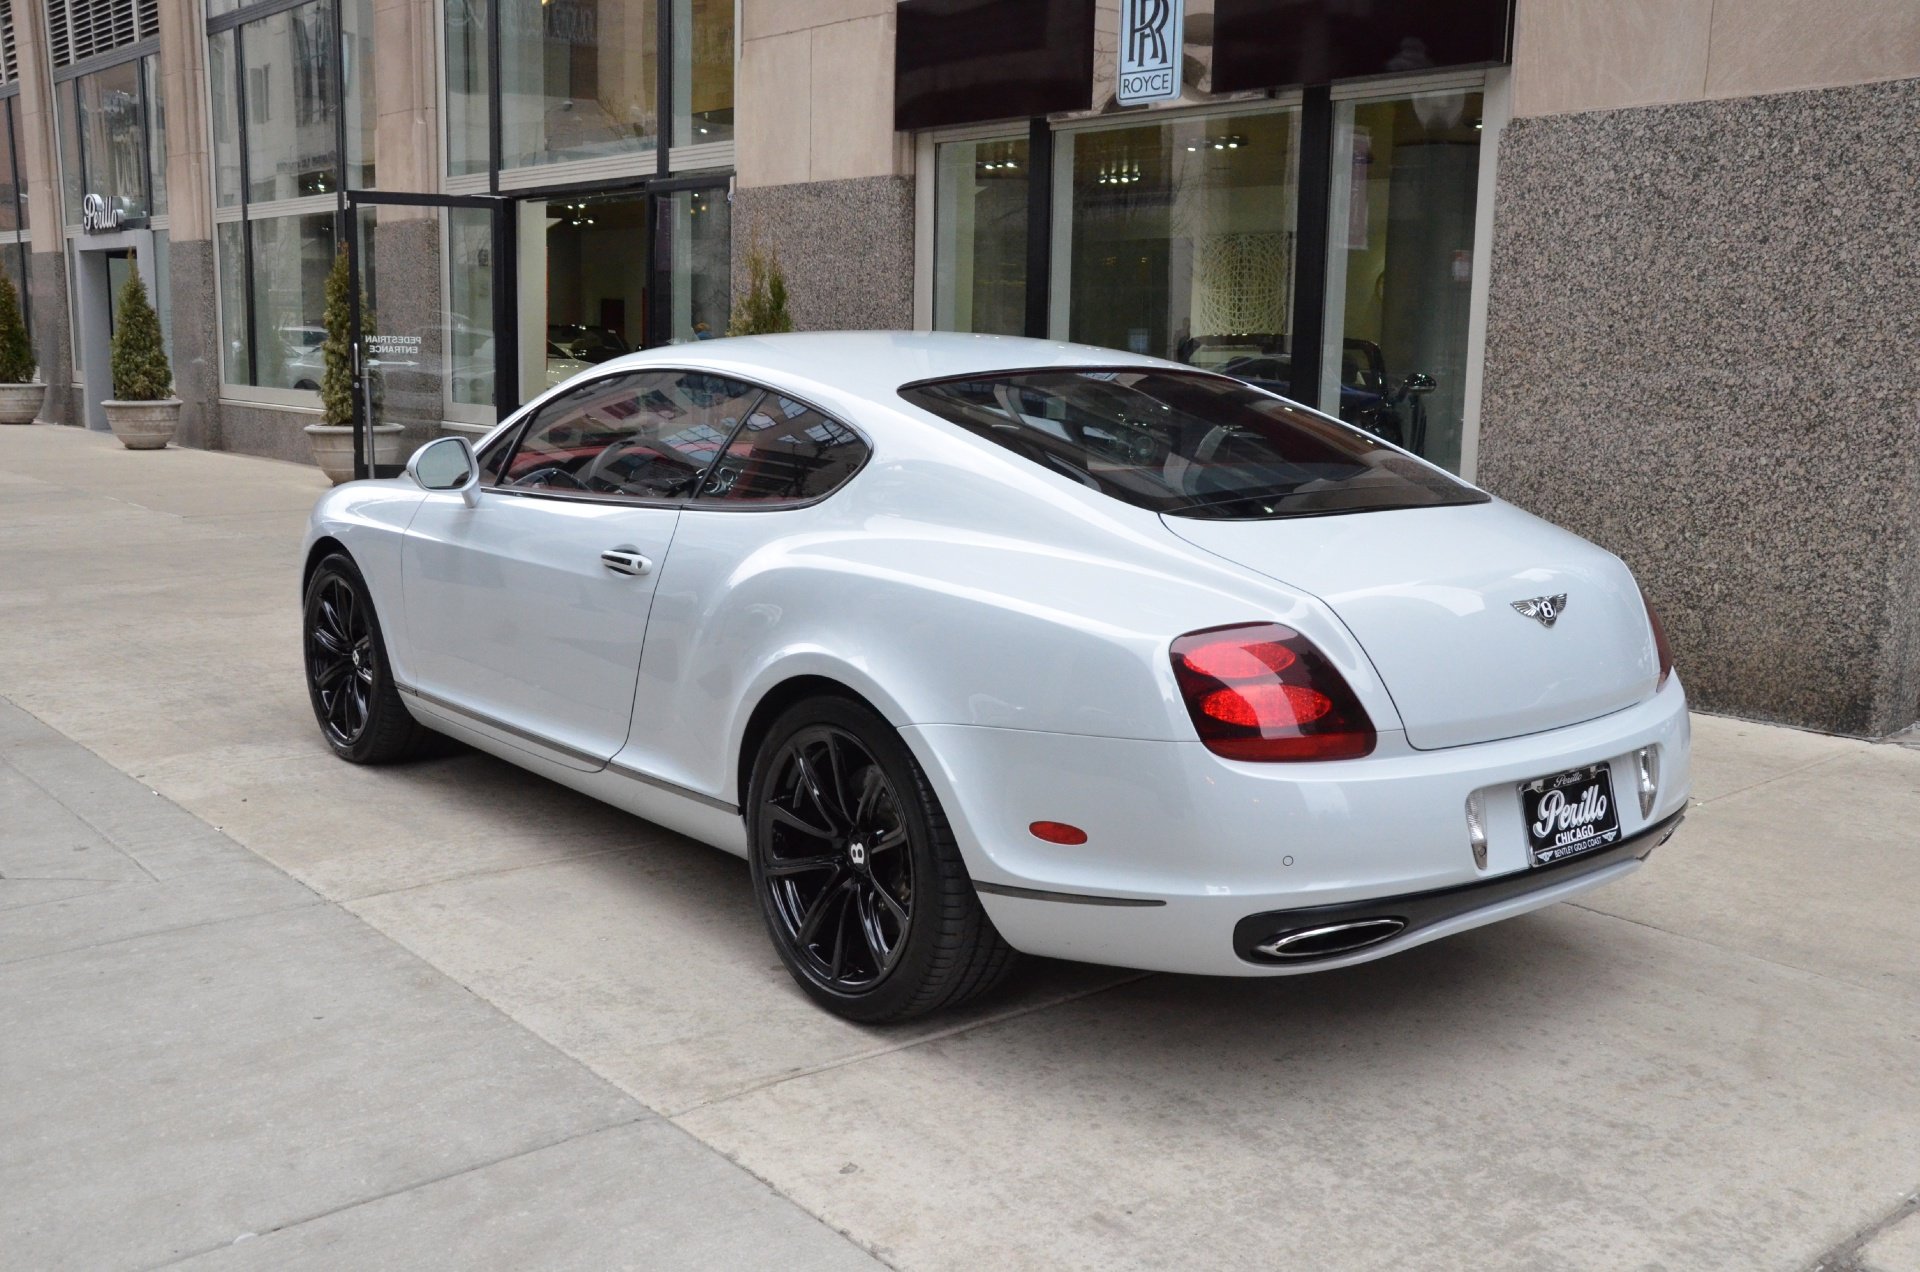 2010, Bentley, White, Continental, Supersports, Coupe, Uk Wallpaper